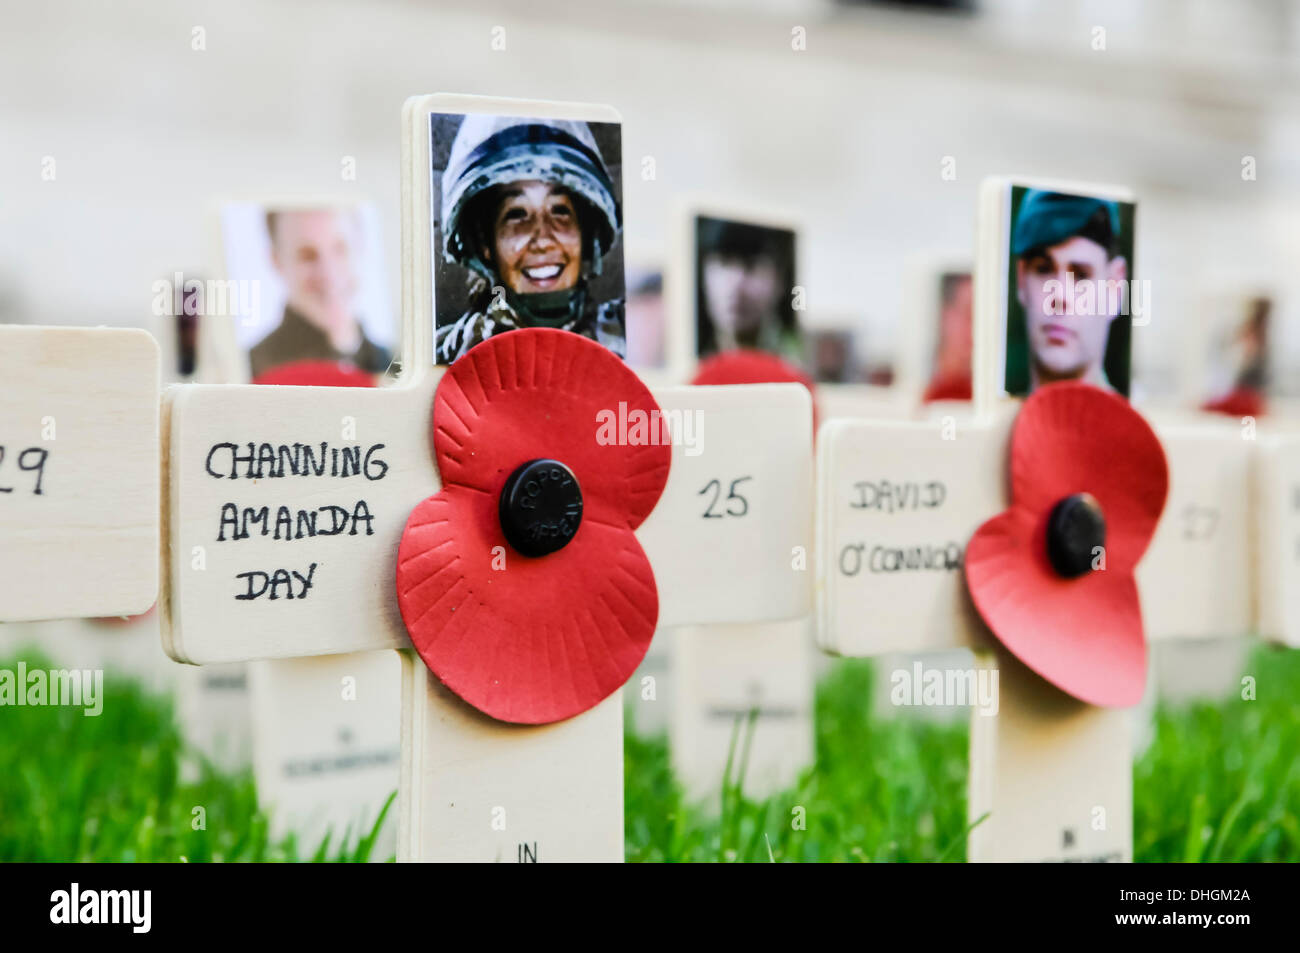 Belfast, Northern Ireland. 10th Nov 2013 - Wooden crosses in the Garden of Remembrance in Belfast to commemorate Corporals Channing Day and David O'Connor, killed in a hostile attack in Afghanistan while on active duty in October 2012. Stock Photo